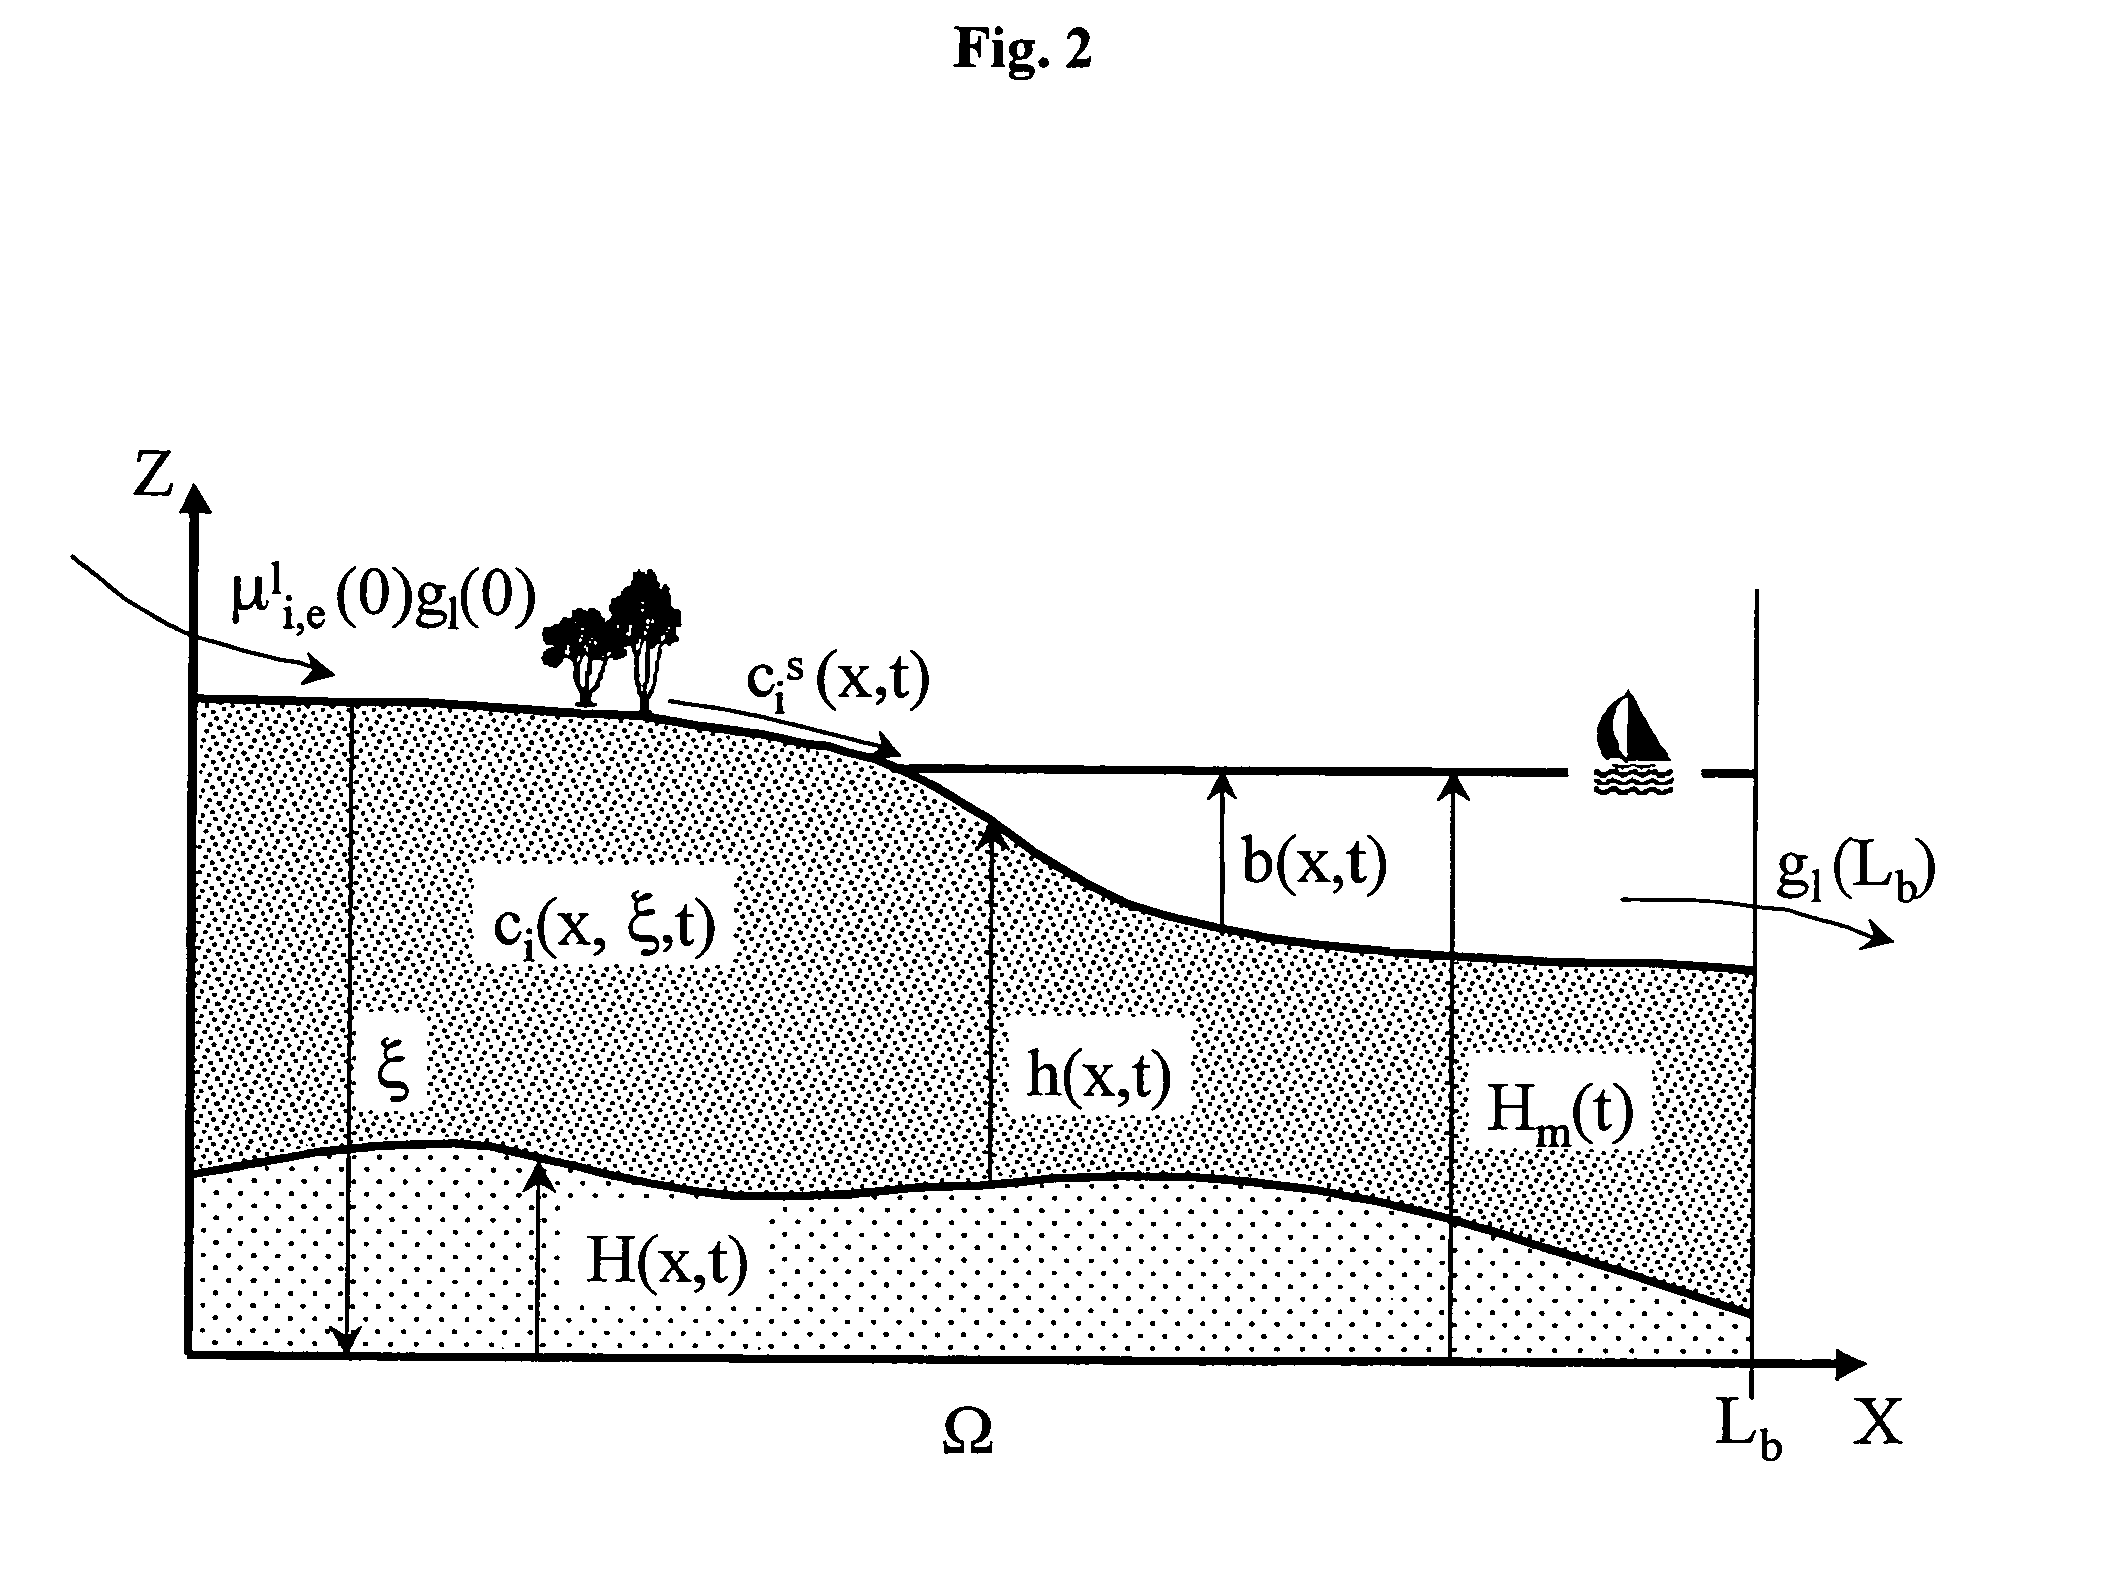 Method of simulating the sedimentary deposition in a basin respecting the thicknesses of the sedimentary sequences